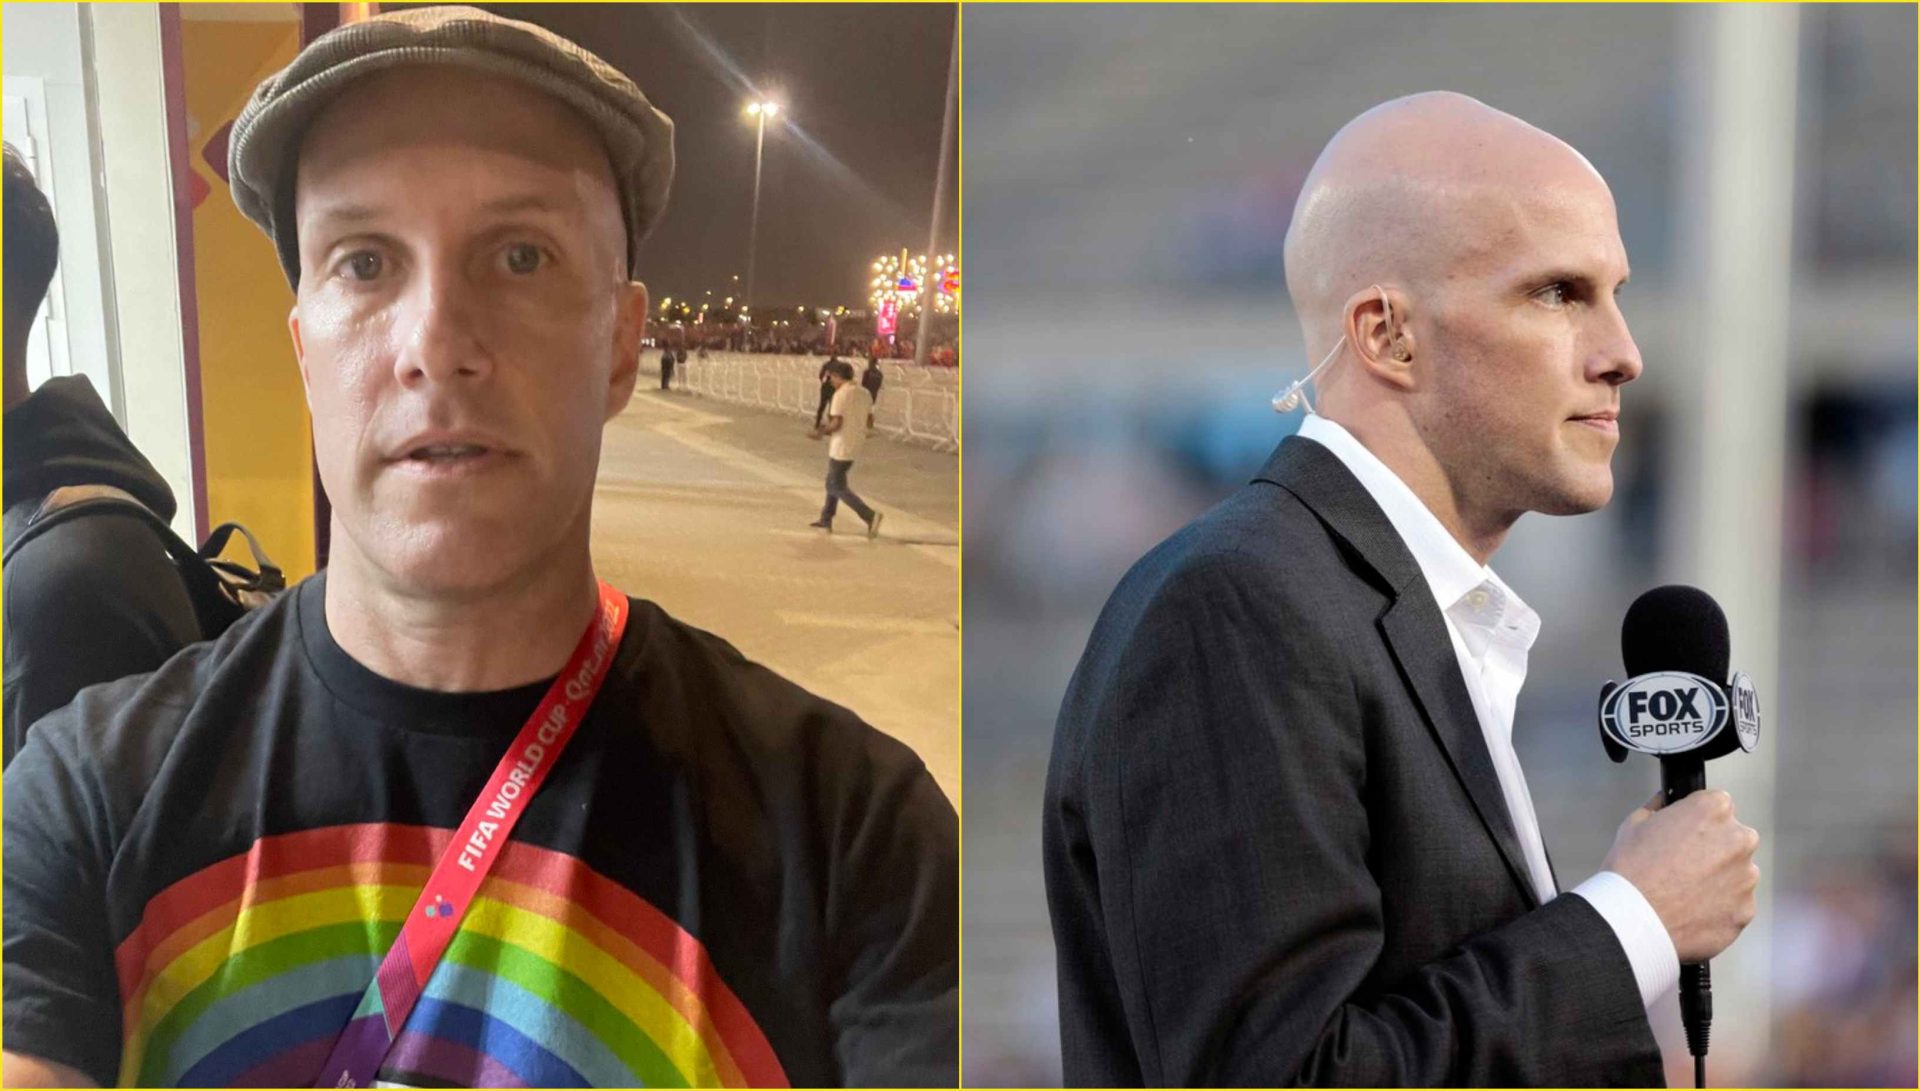 US football journalist Grant Wahl dies days after being detained in Qatar for rainbow jersey